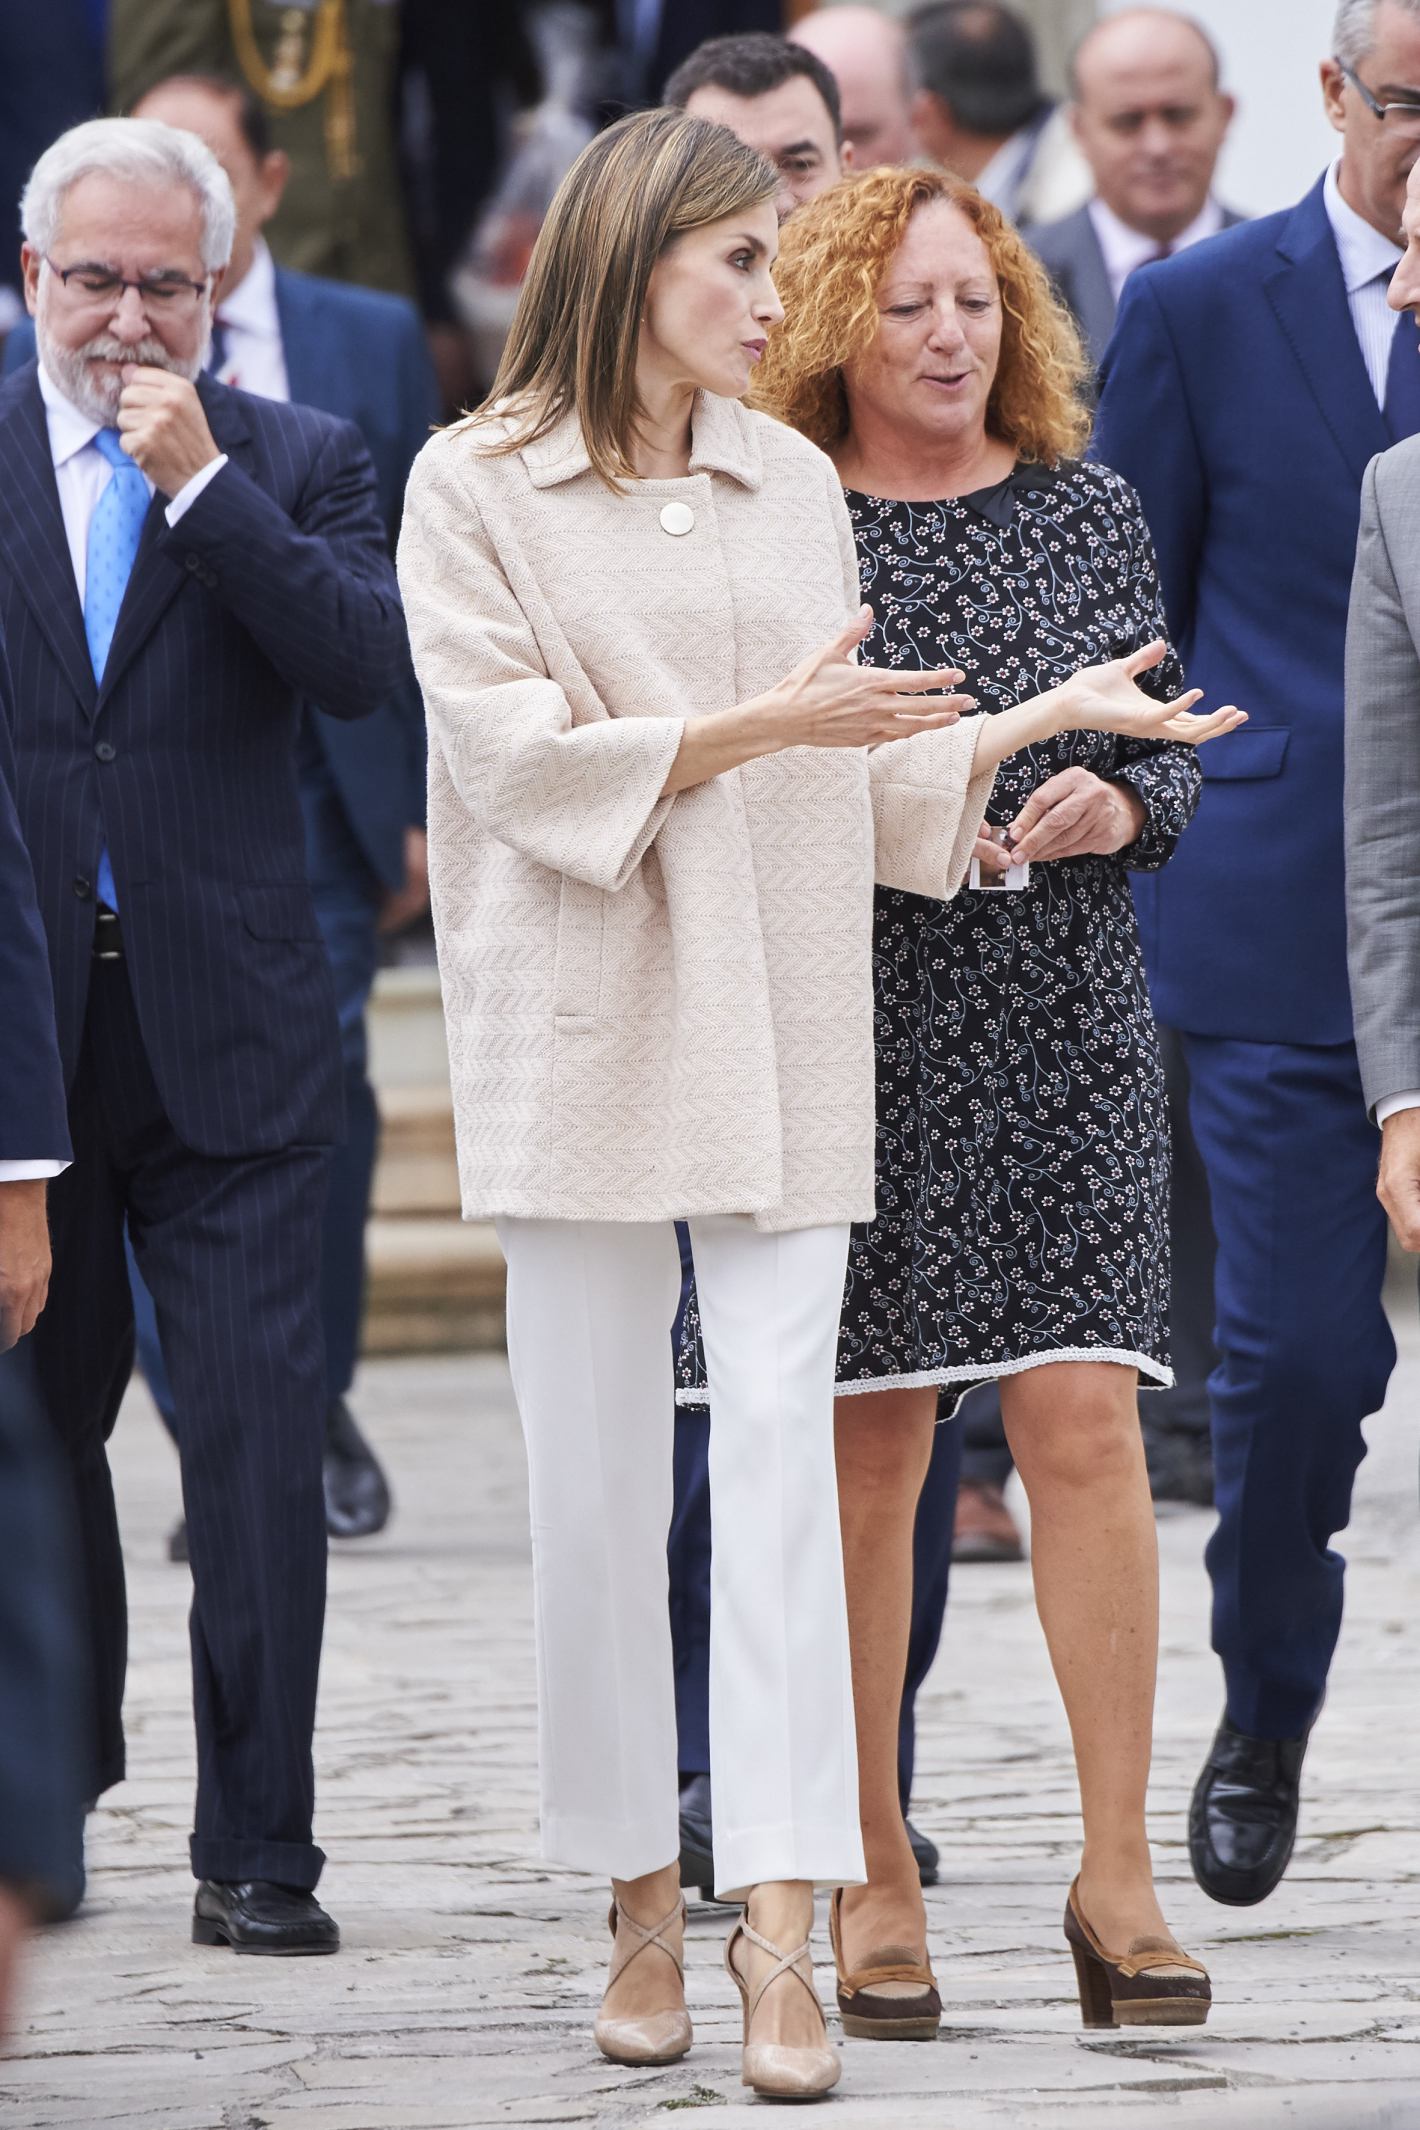 Mandatory Credit: Photo by REX/Shutterstock (6073859v) Queen Letizia Queen Letizia attends the Opening of training course at the Institute San Rosendo, Mondonedo, Spain - 04 Oct 2016